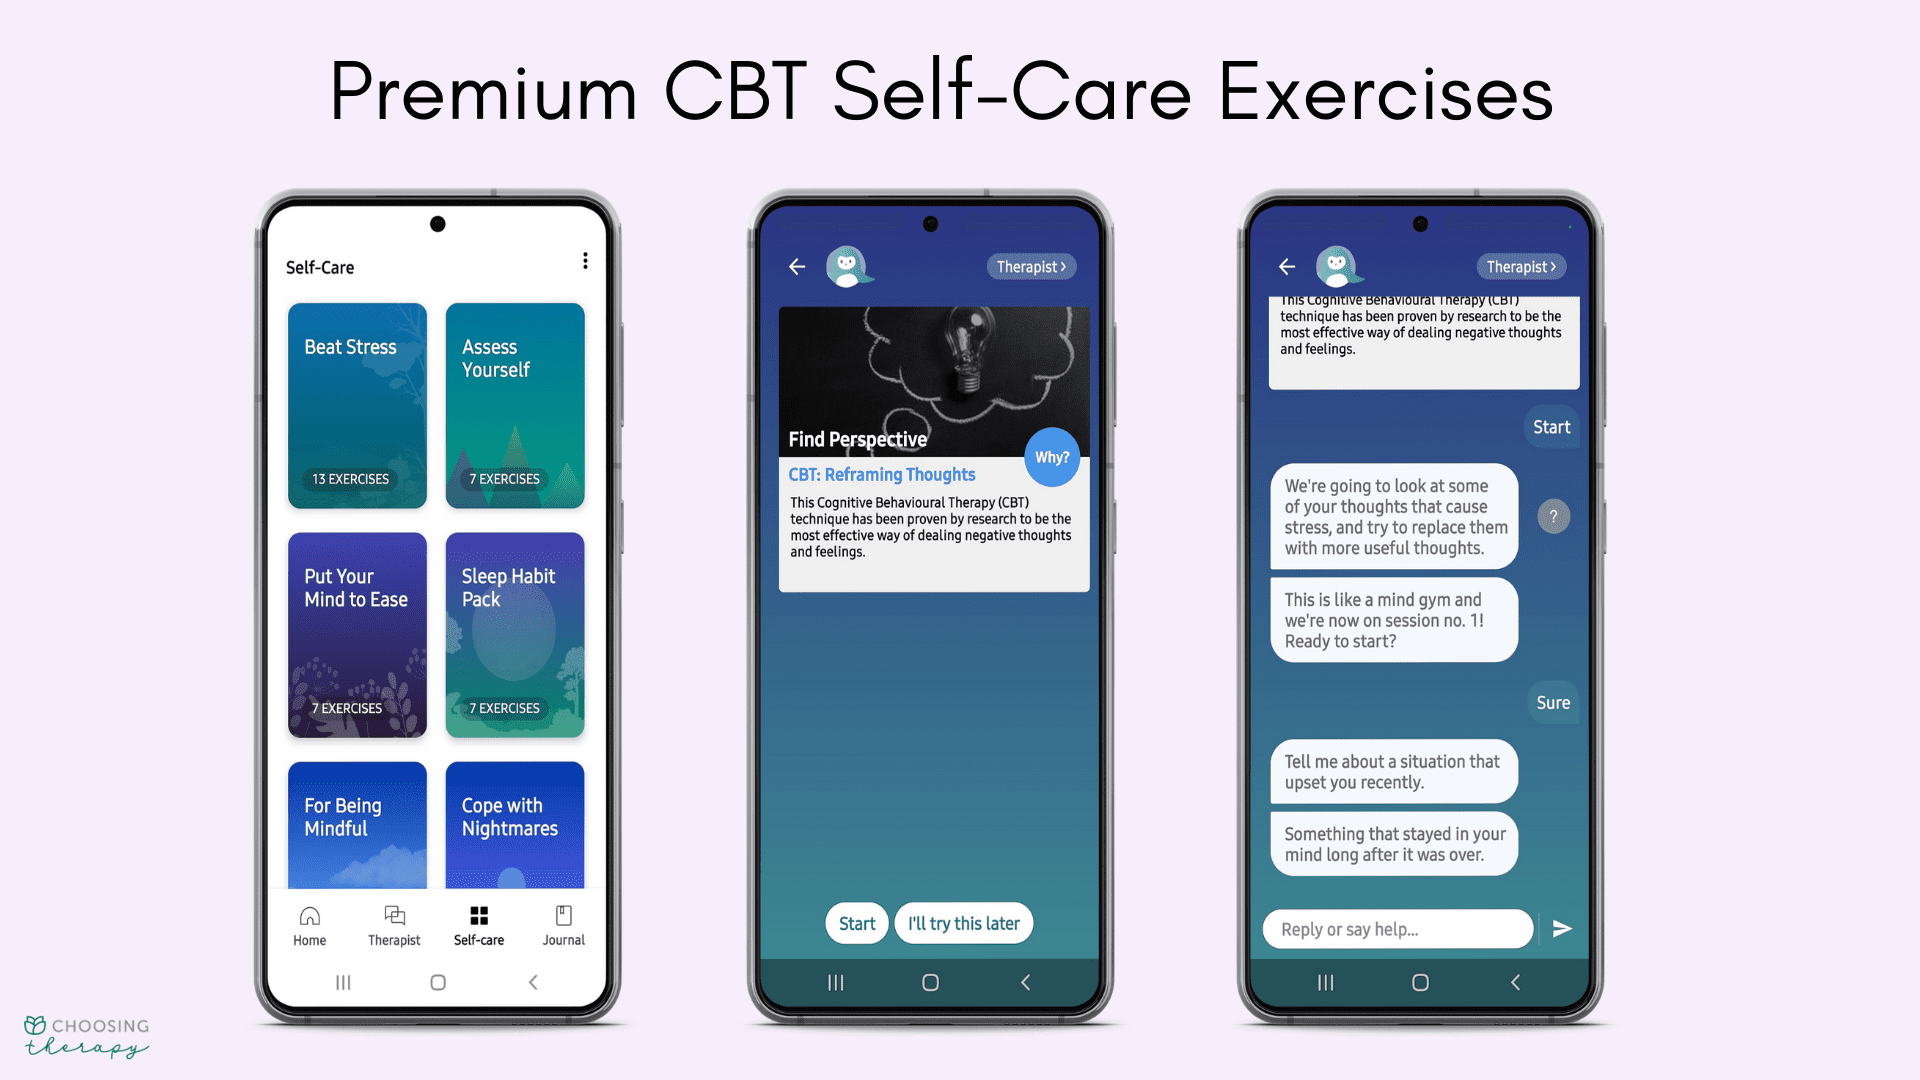 Wysa App Review 2022 - Image of what a premium CBT exercise looks like in the Wysa app.png